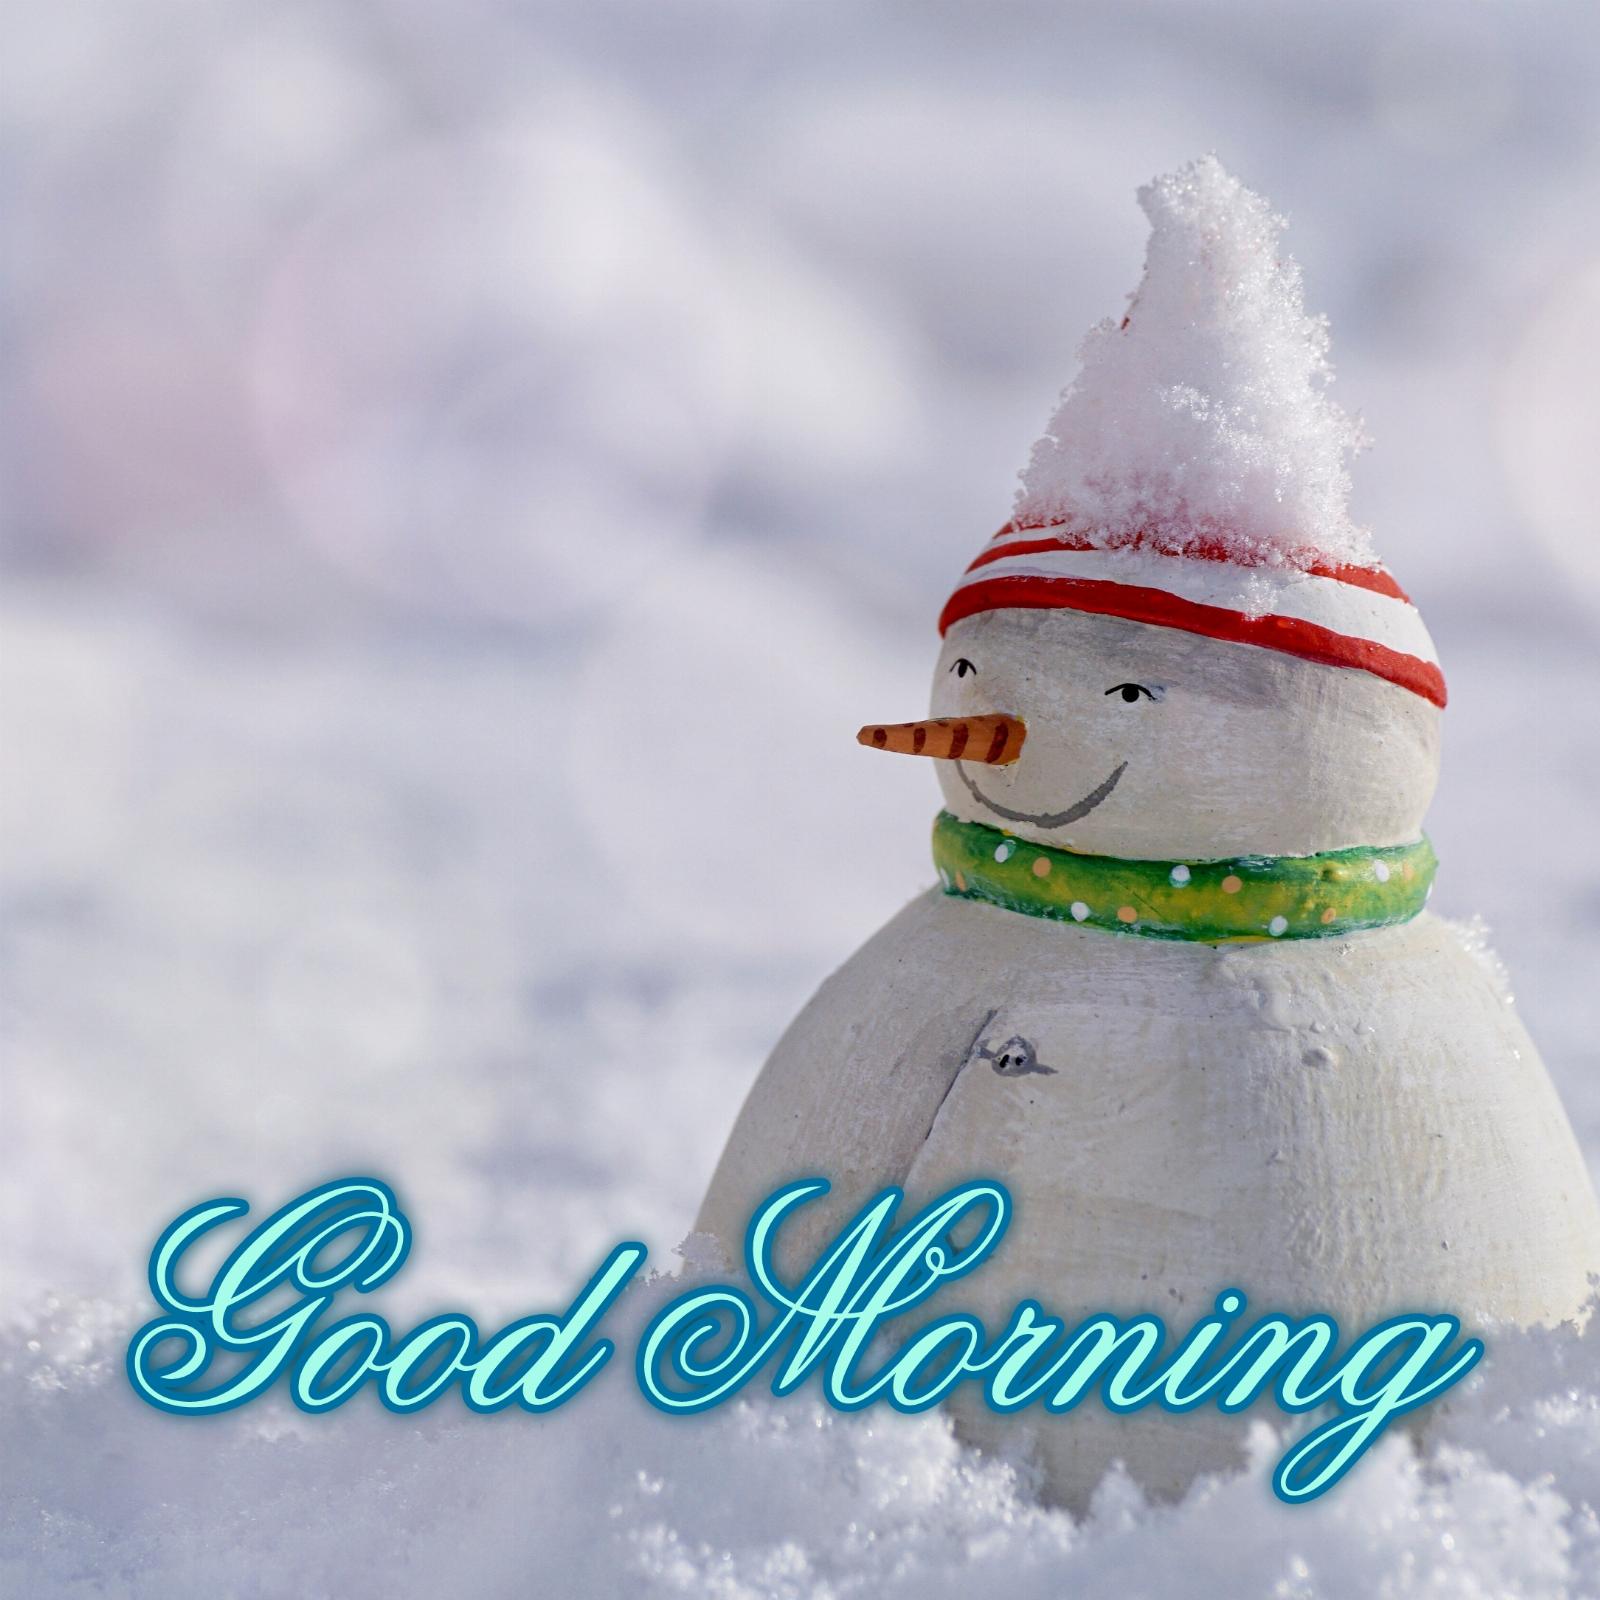 Good Morning Winter Snowman Images